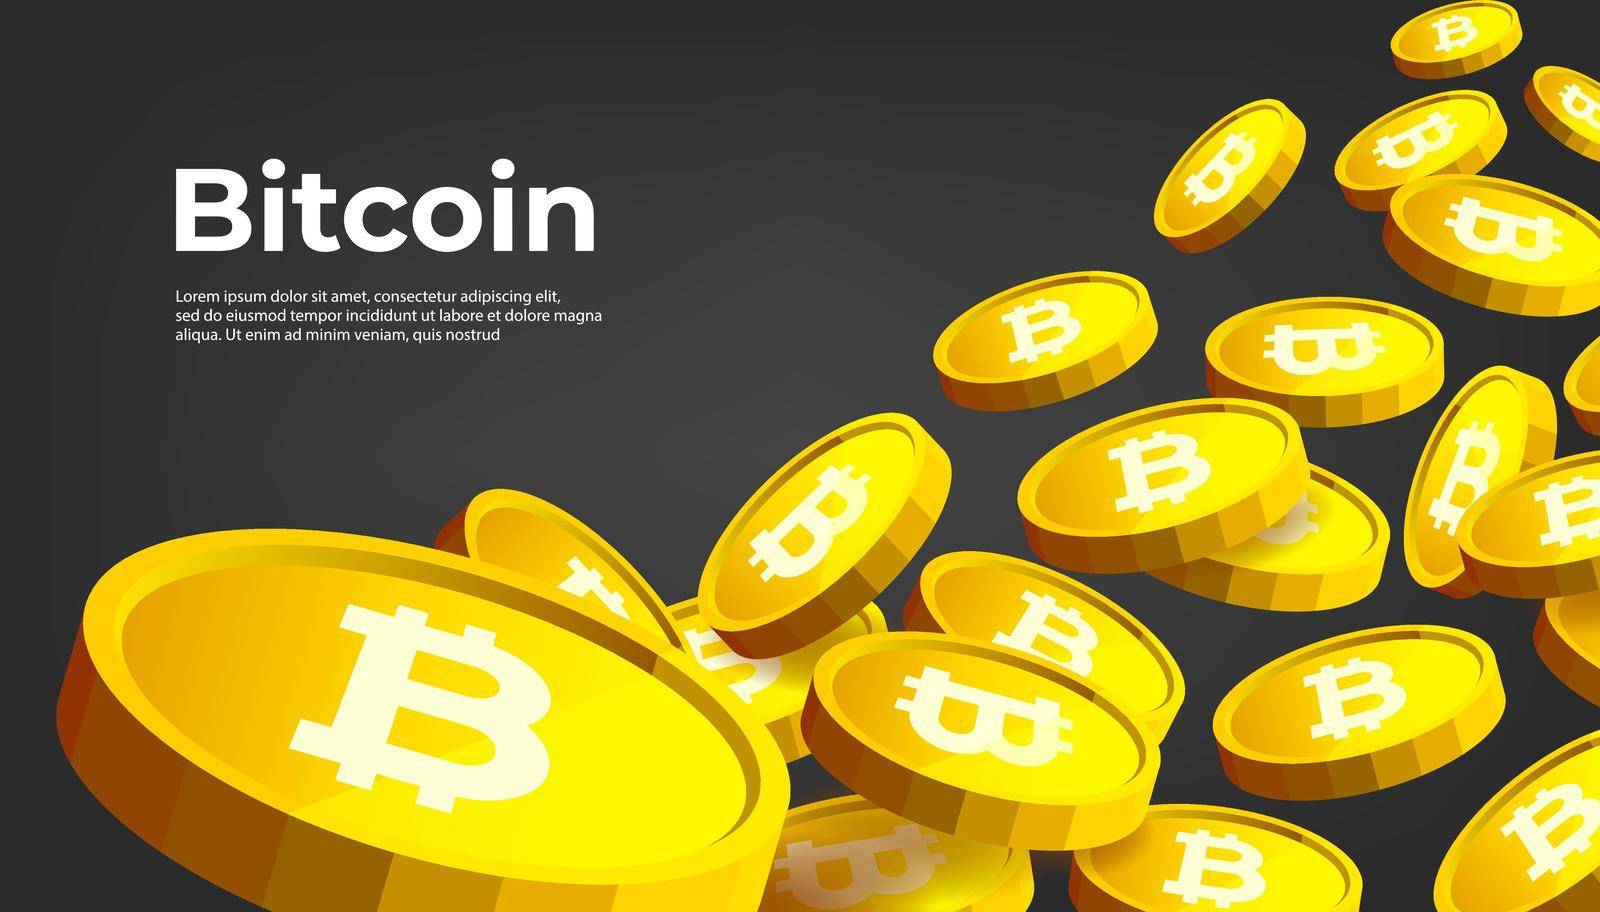 Bitcoin BTC banner. Bitcoin cryptocurrency concept banner background. by windawake